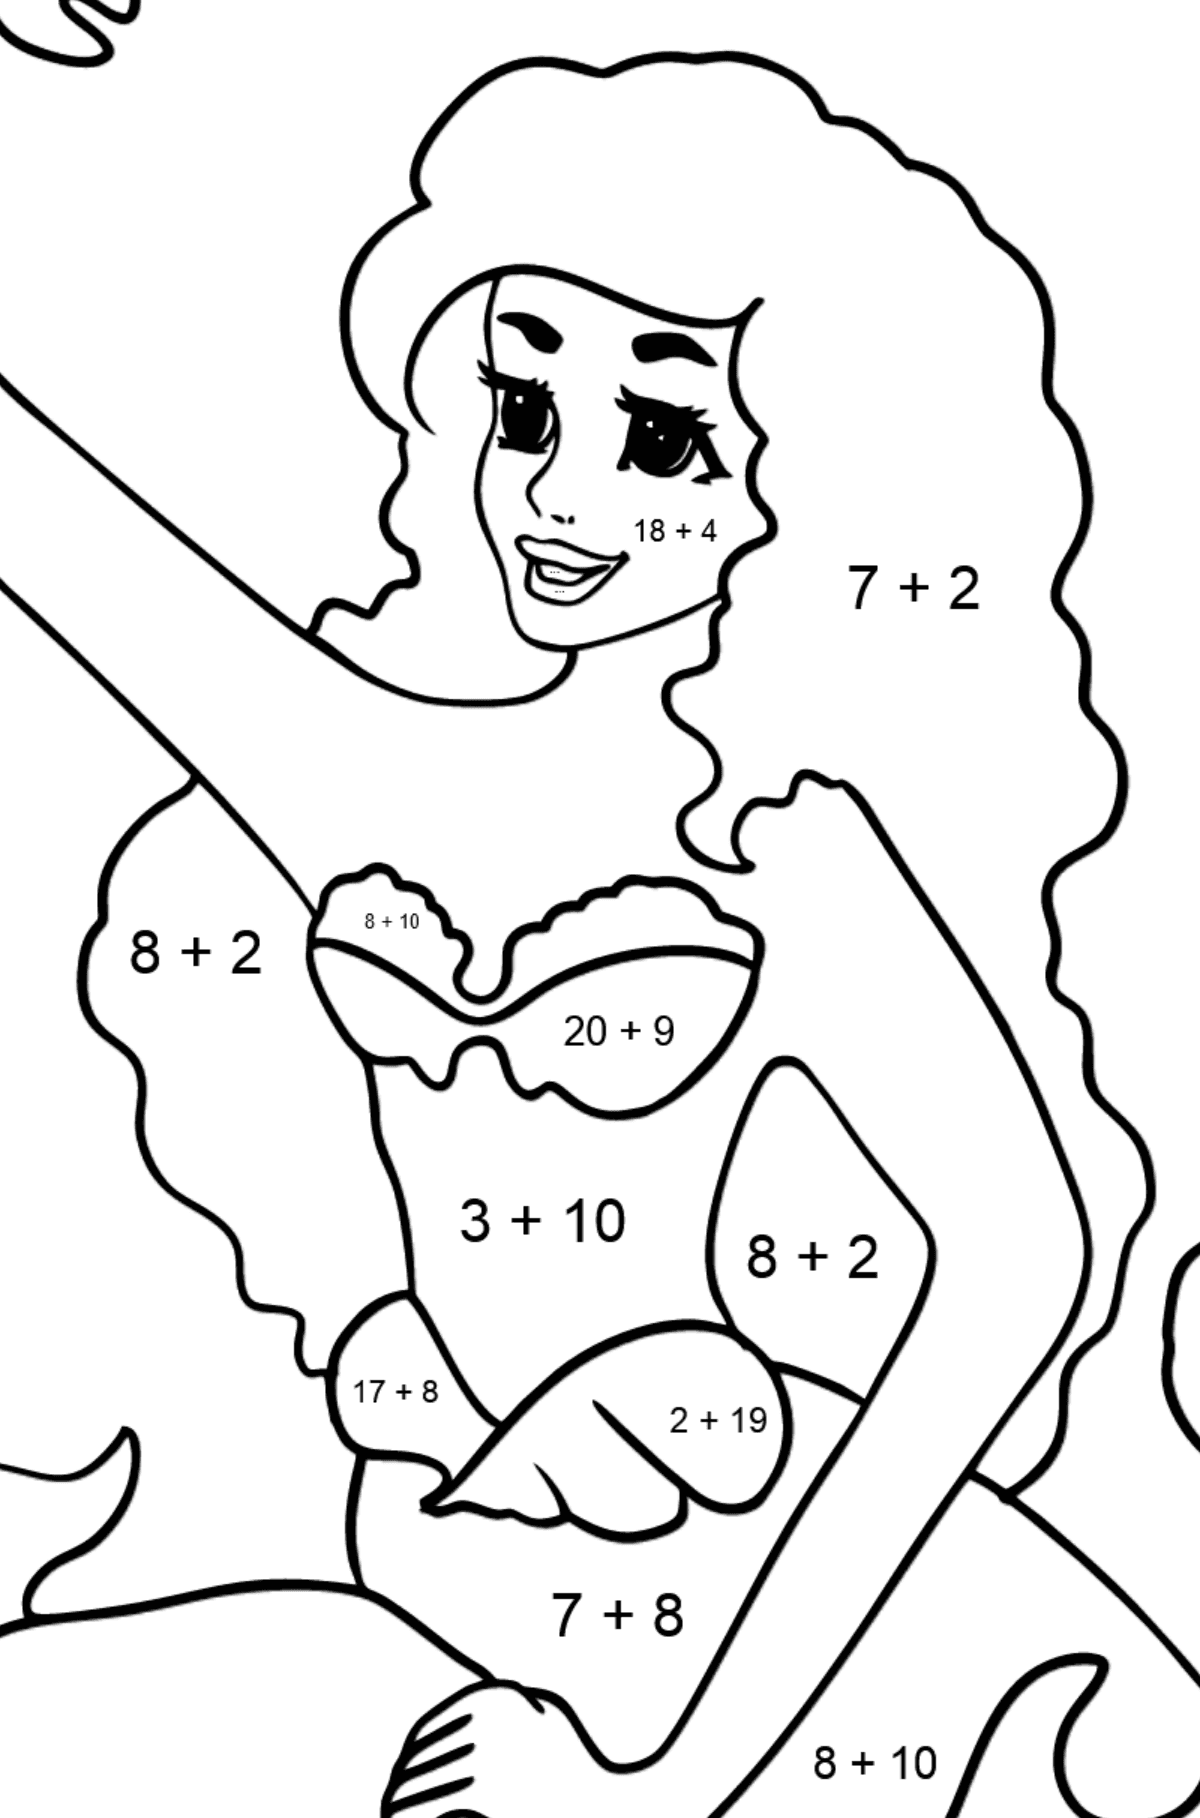 Coloring Page Mermaid and Crab - Math Coloring - Addition for Kids